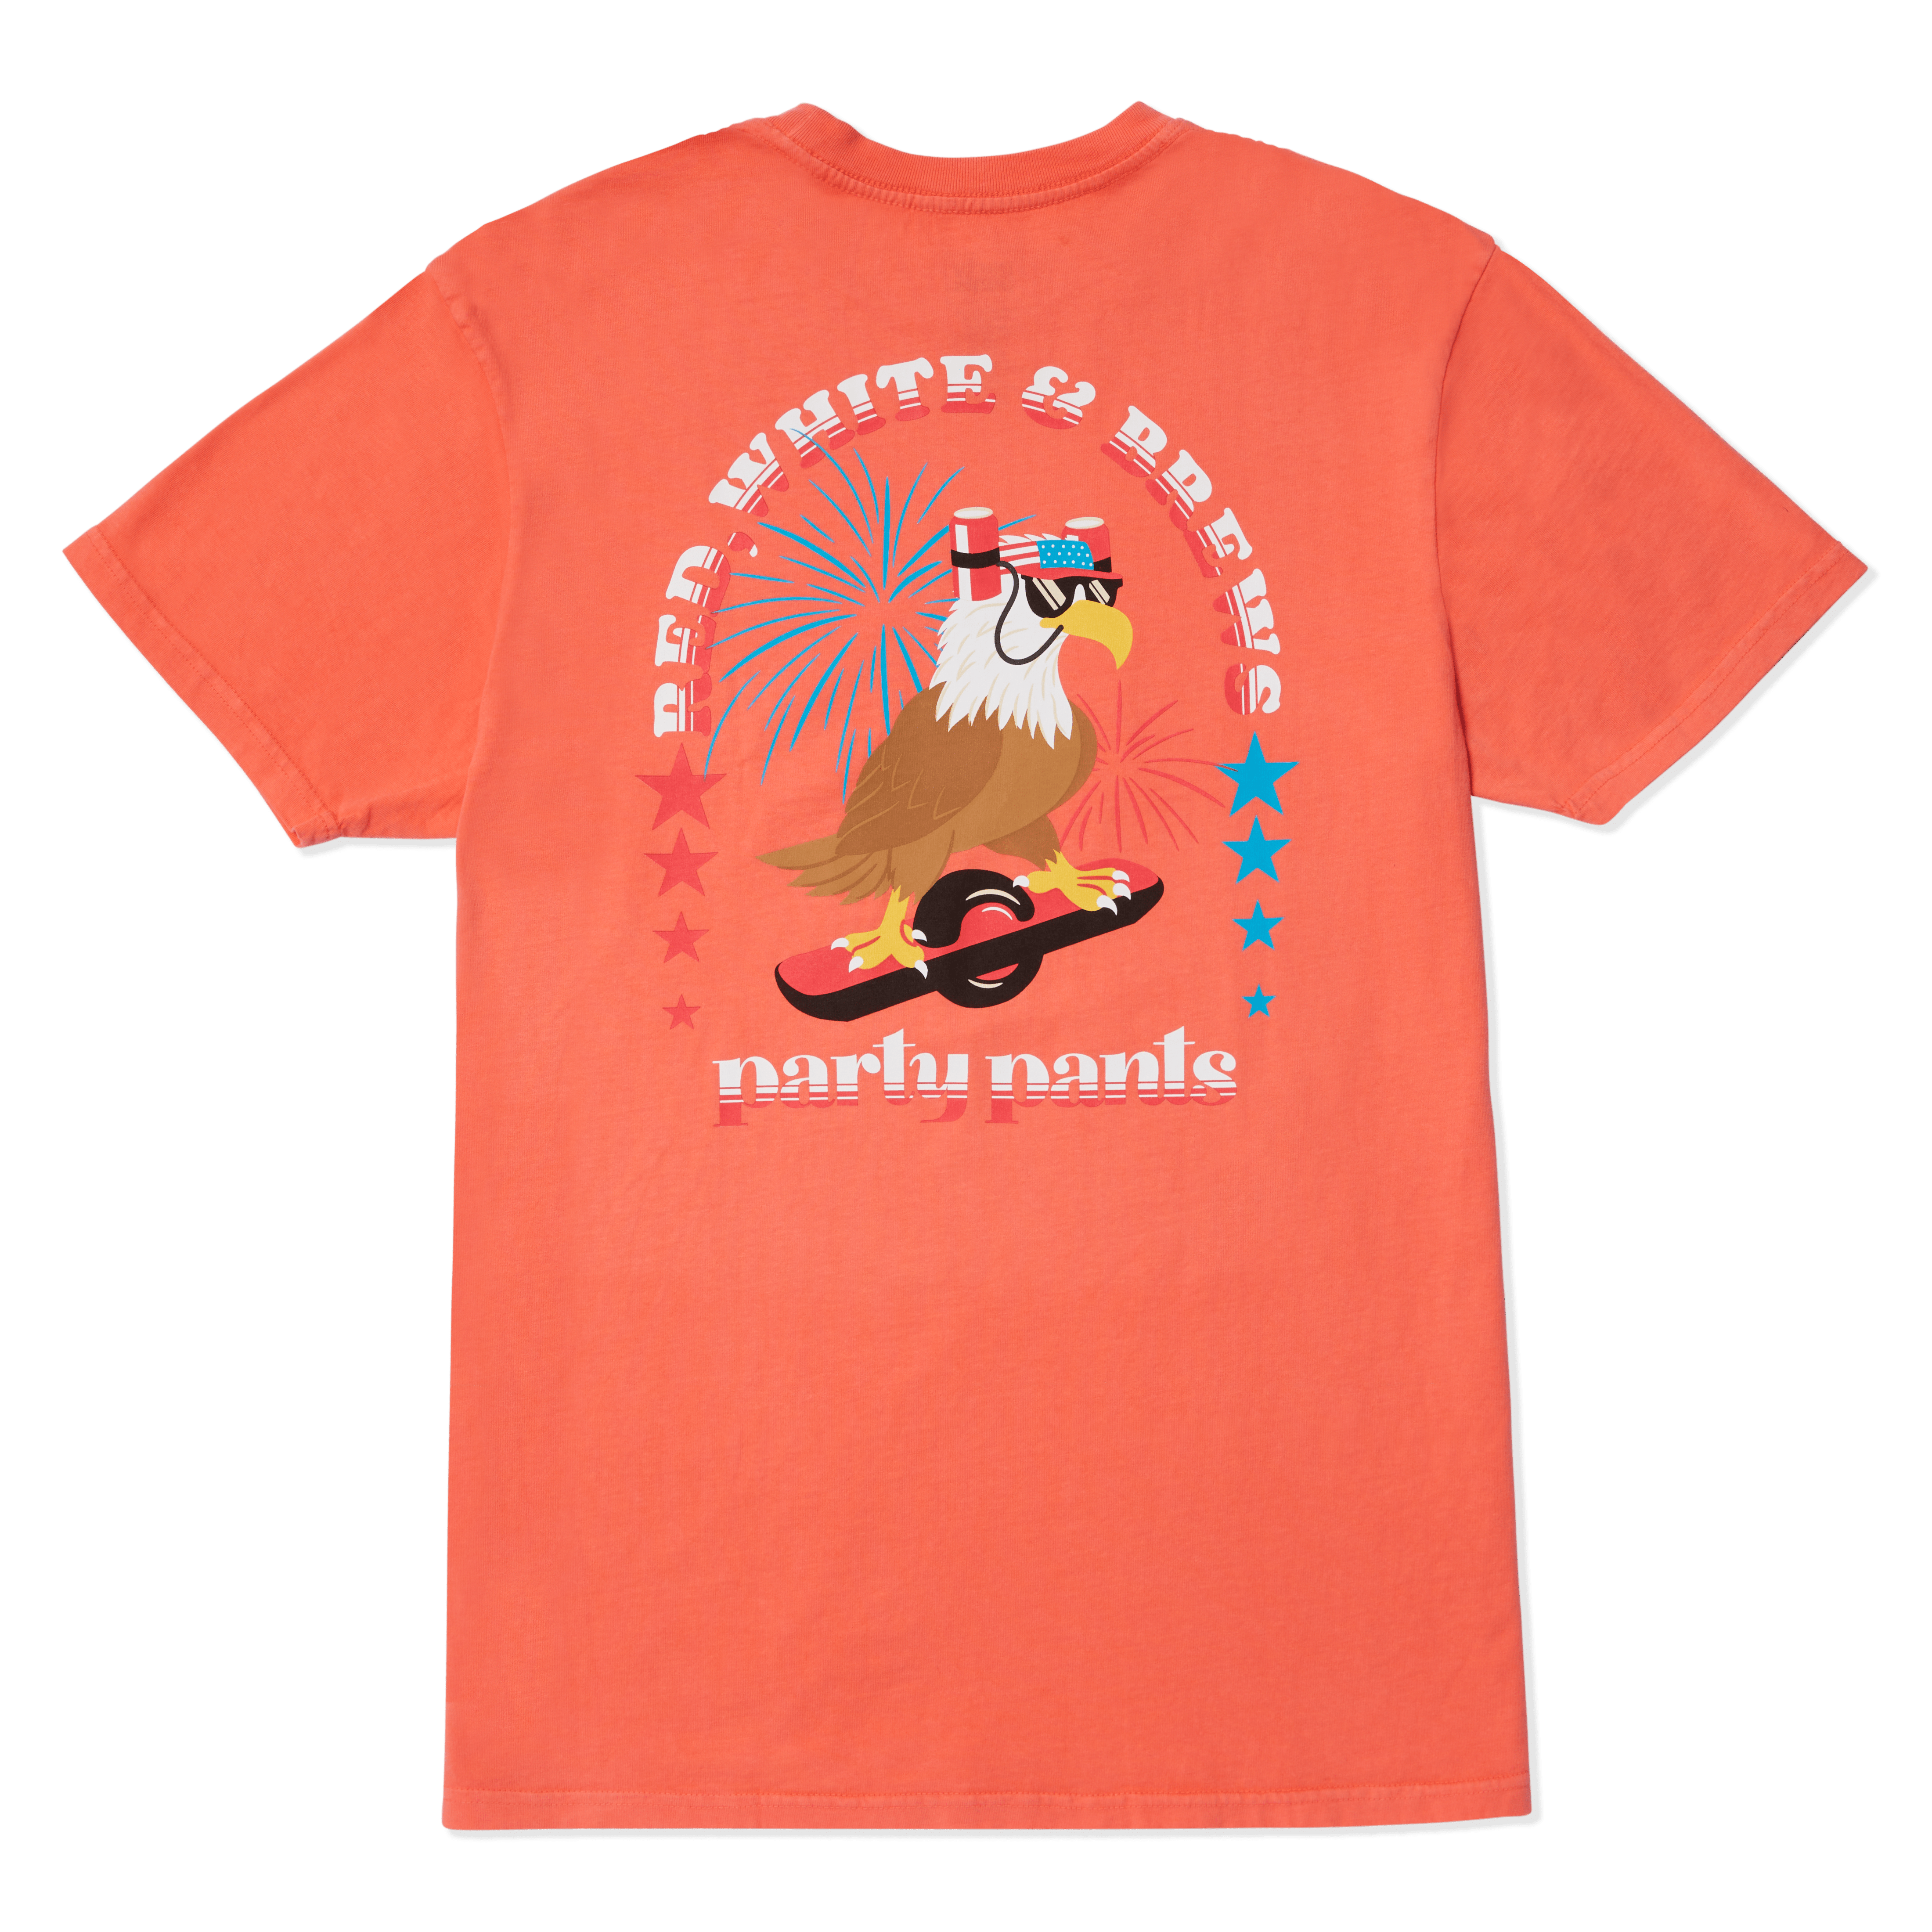 SHRED EAGLE T-SHIRT - CORAL TEE PARTY PANTS 